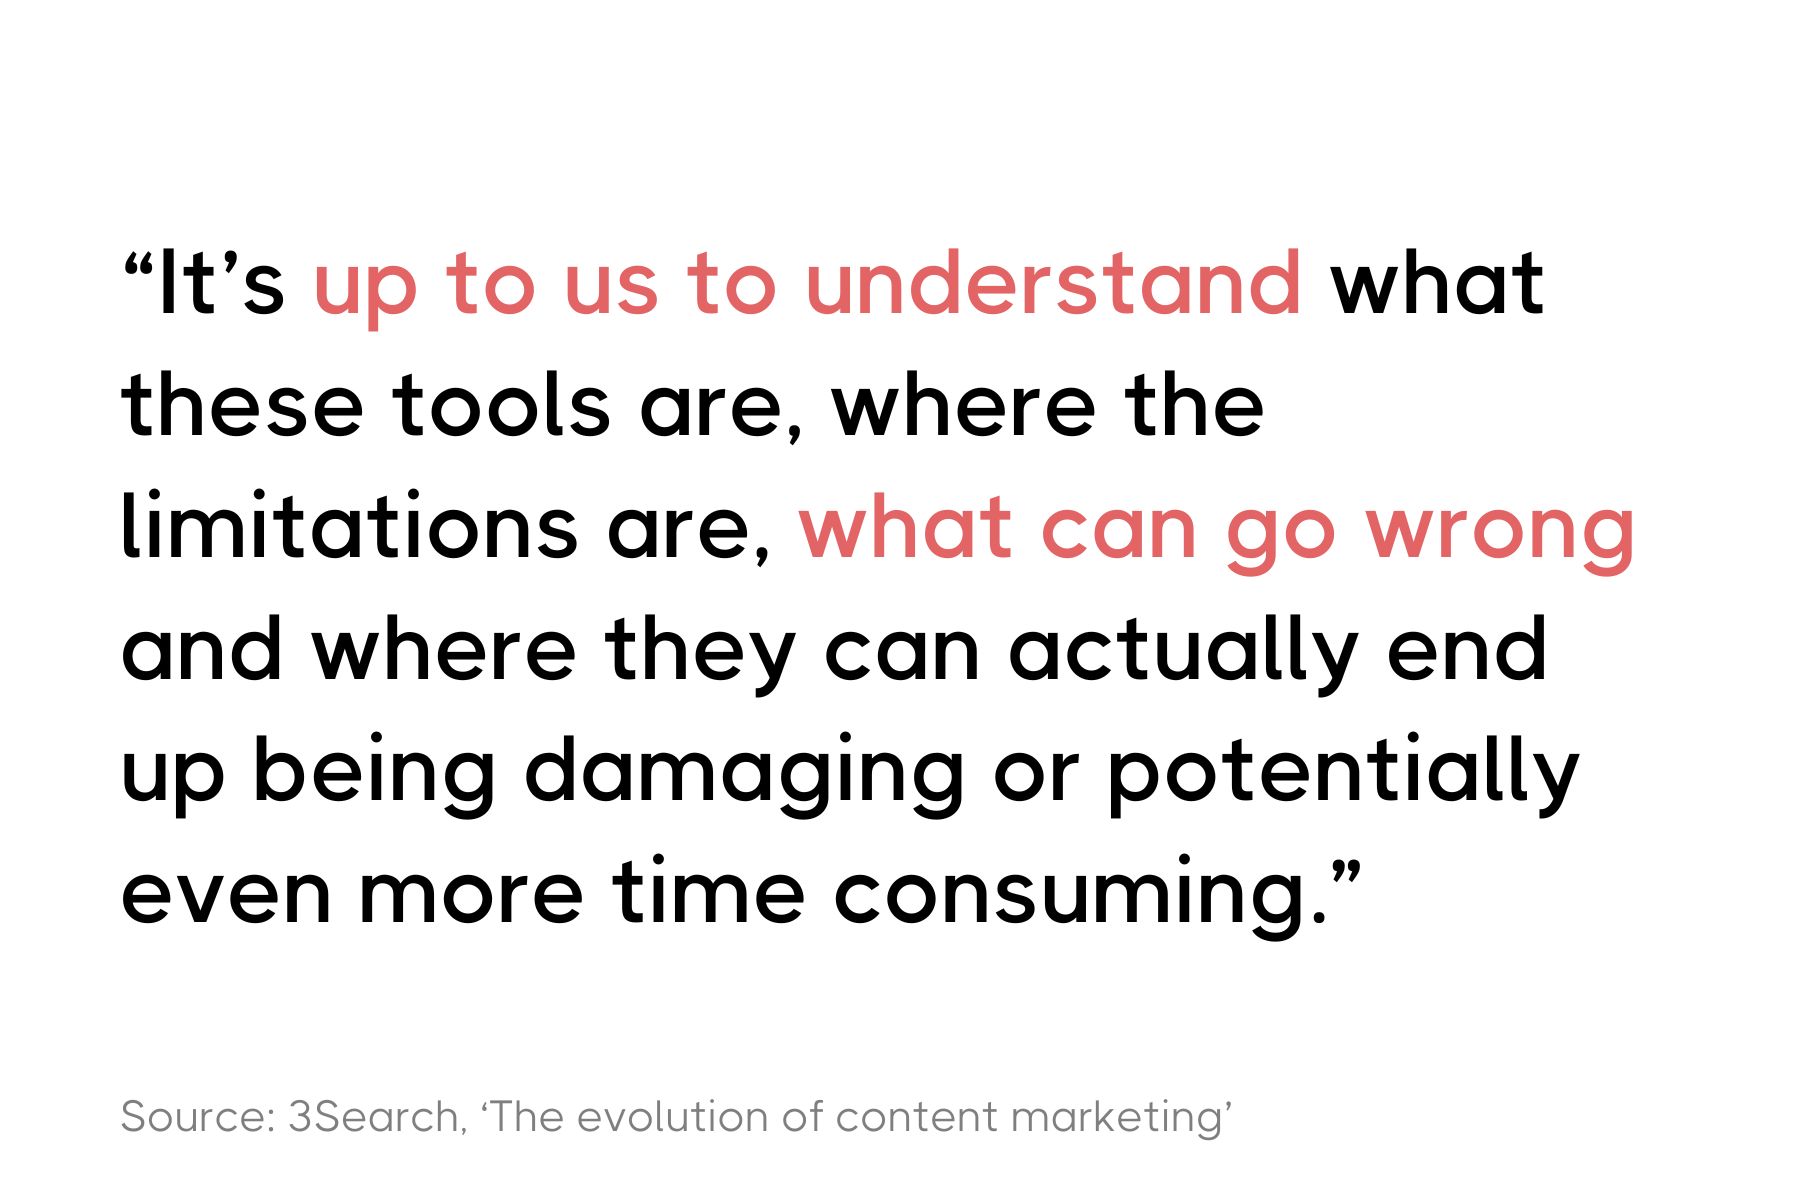 The image displays the quote: "It’s up to us to understand what these tools are, where the limitations are, what can go wrong and where they can actually end up being damaging or potentially even more time consuming." This is attributed to a source named 3Search, from an article titled 'The evolution of content marketing.' The text is arranged in a clean, straightforward font, set against a minimalistic background to ensure the focus remains on the quote's content.